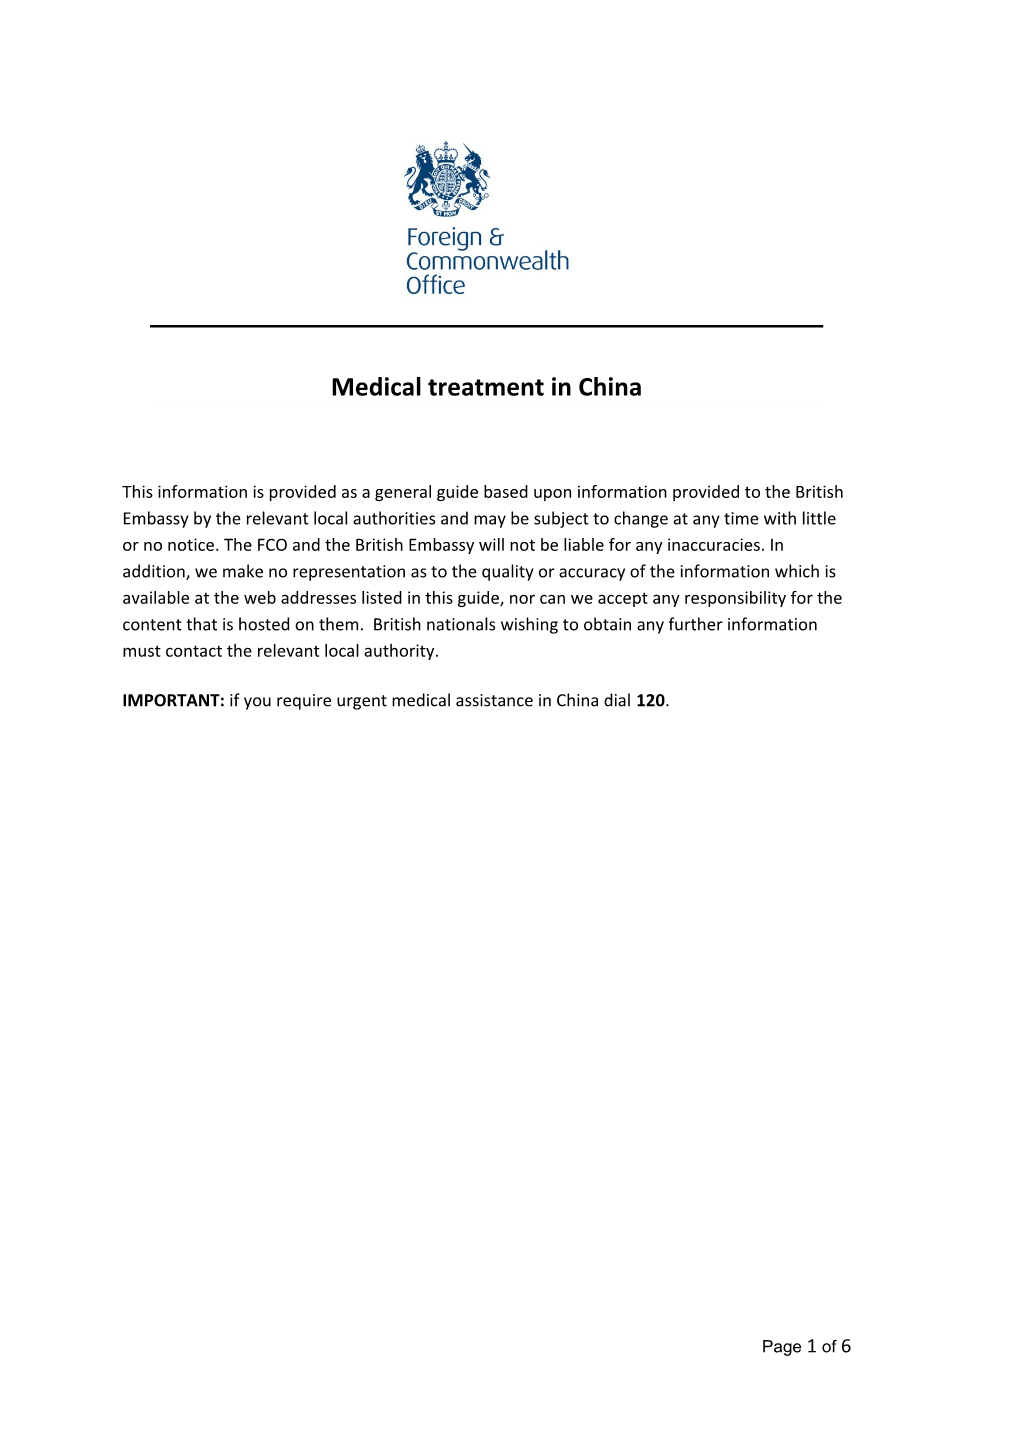 An Overview of Medical Treatment in China